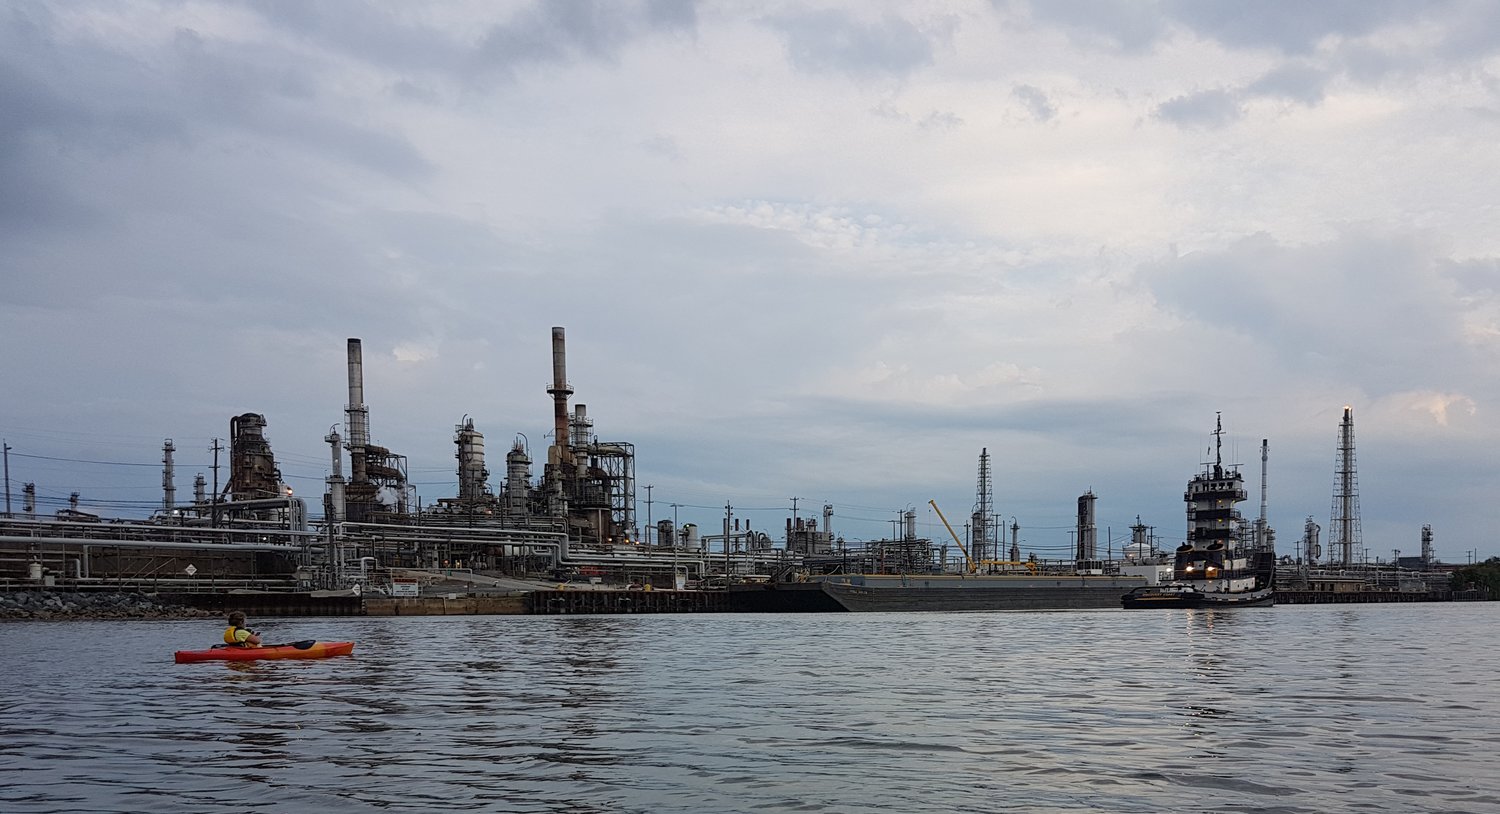 Philadelphia Energy Solutions refinery on the Lower Schuylkill River courtesy of Coryn Wolk